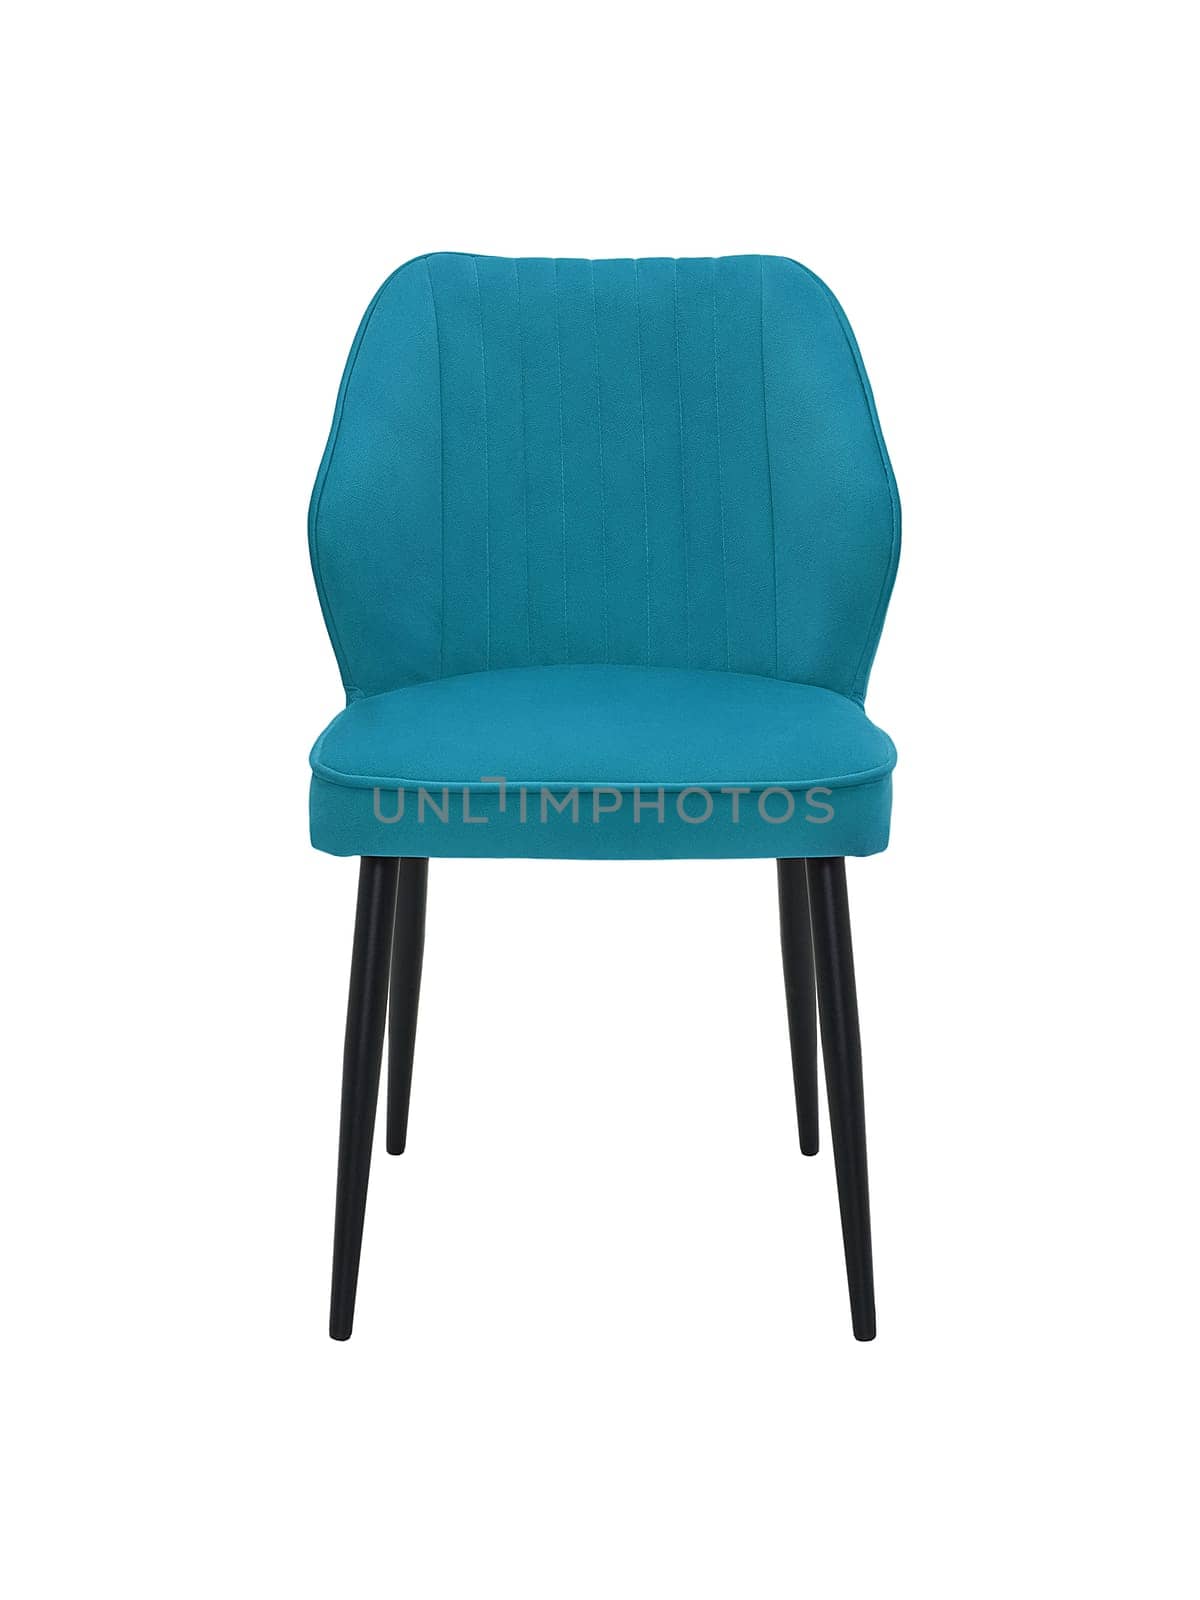 modern blue fabric chair with wooden legs isolated on white background, front view. contemporary furniture in classical style, interior, home design